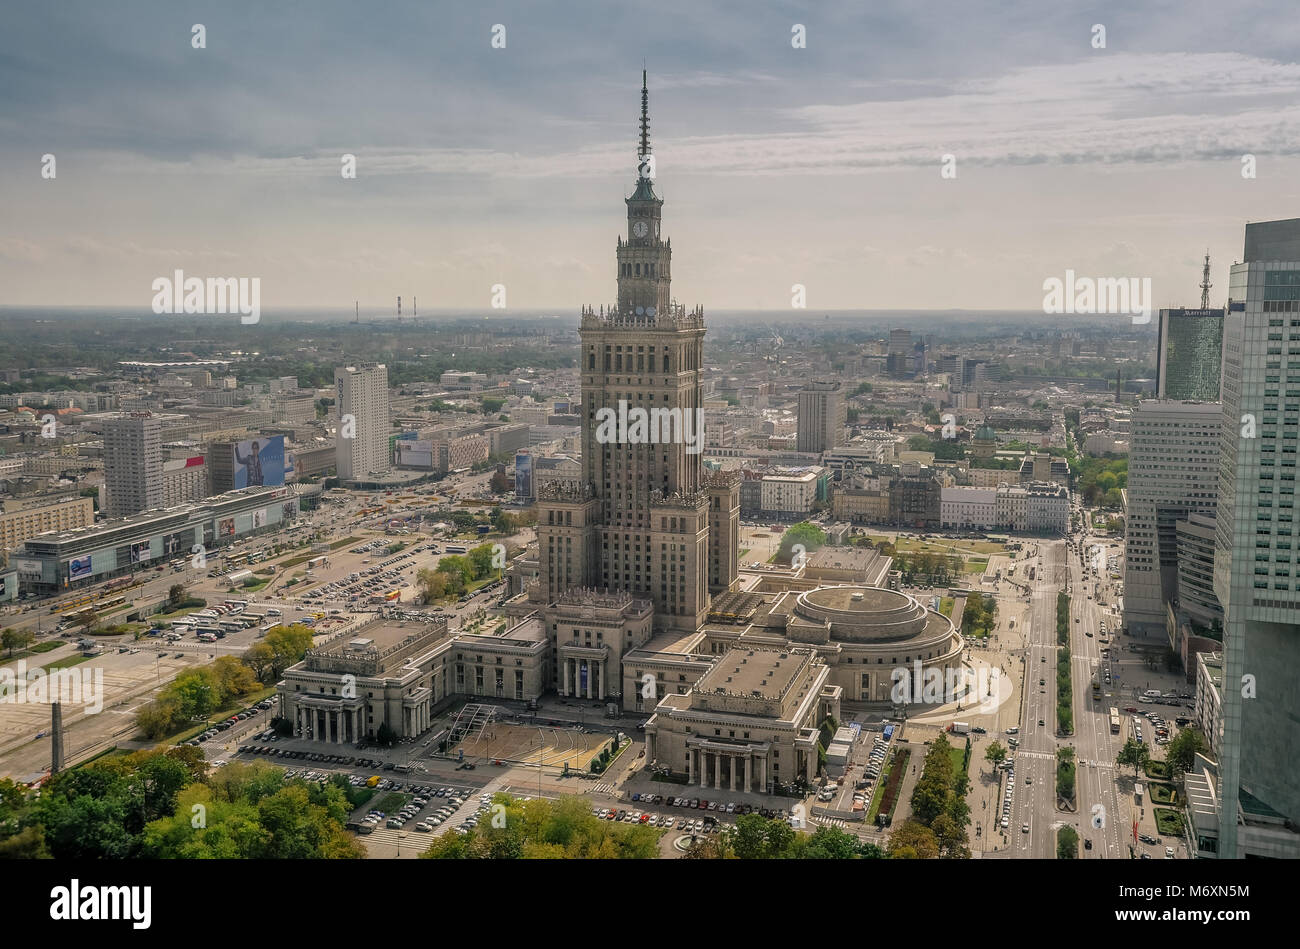 Palace of Culture and Science in Warsaw Poland Stock Photo